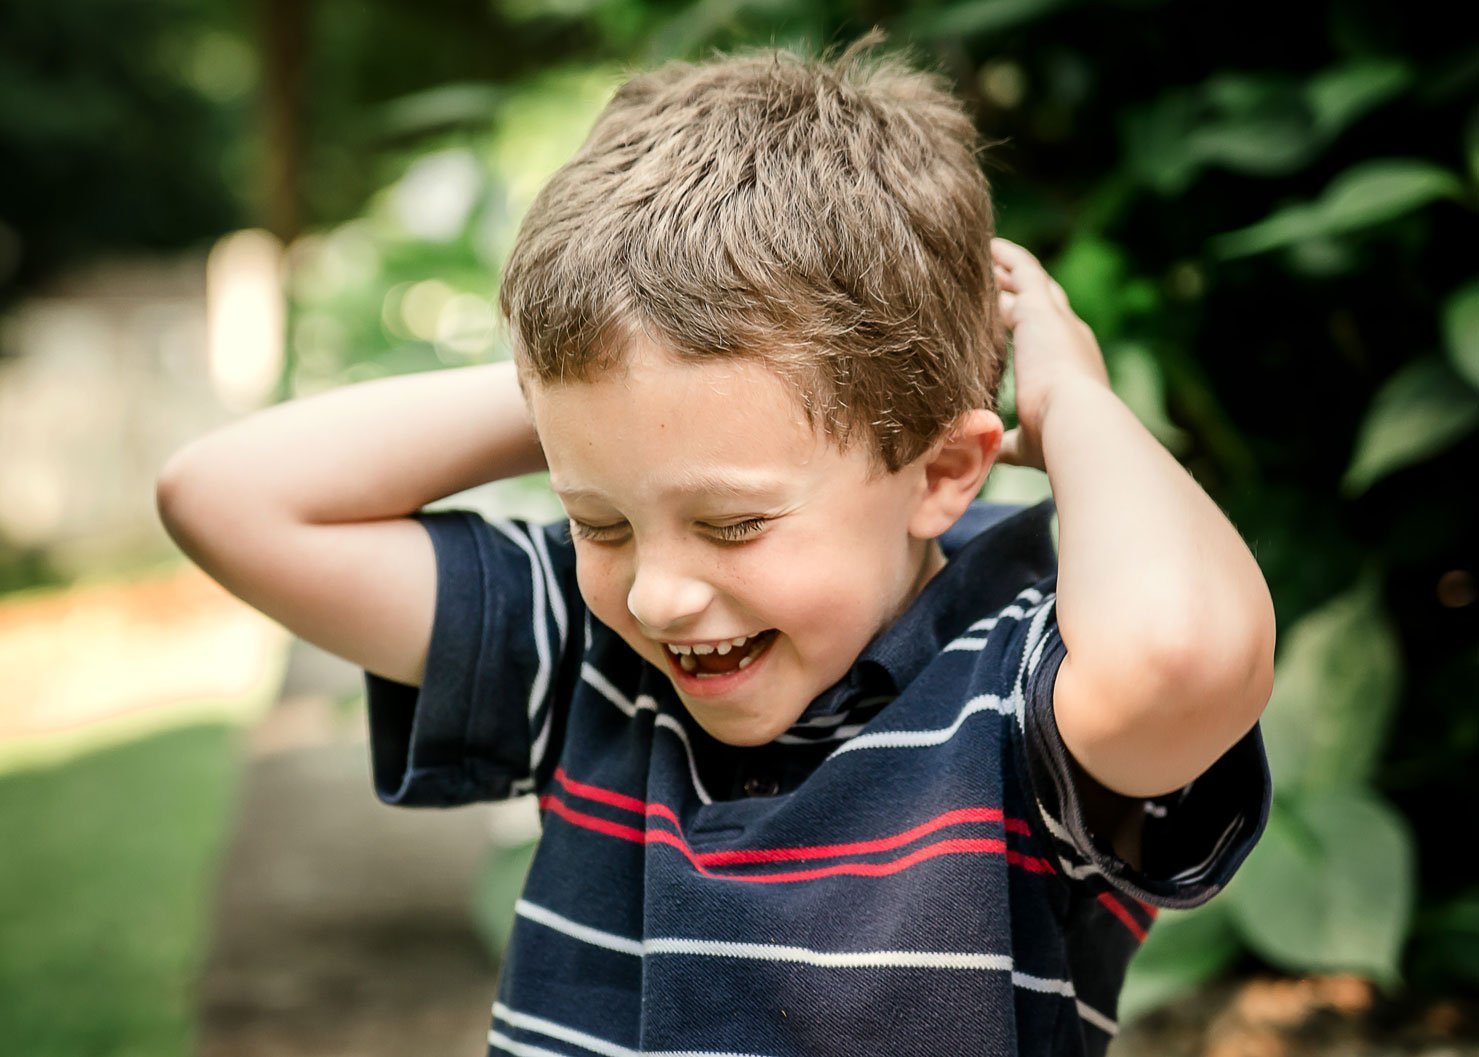 young boy laughing with eyes closed outside in summertime